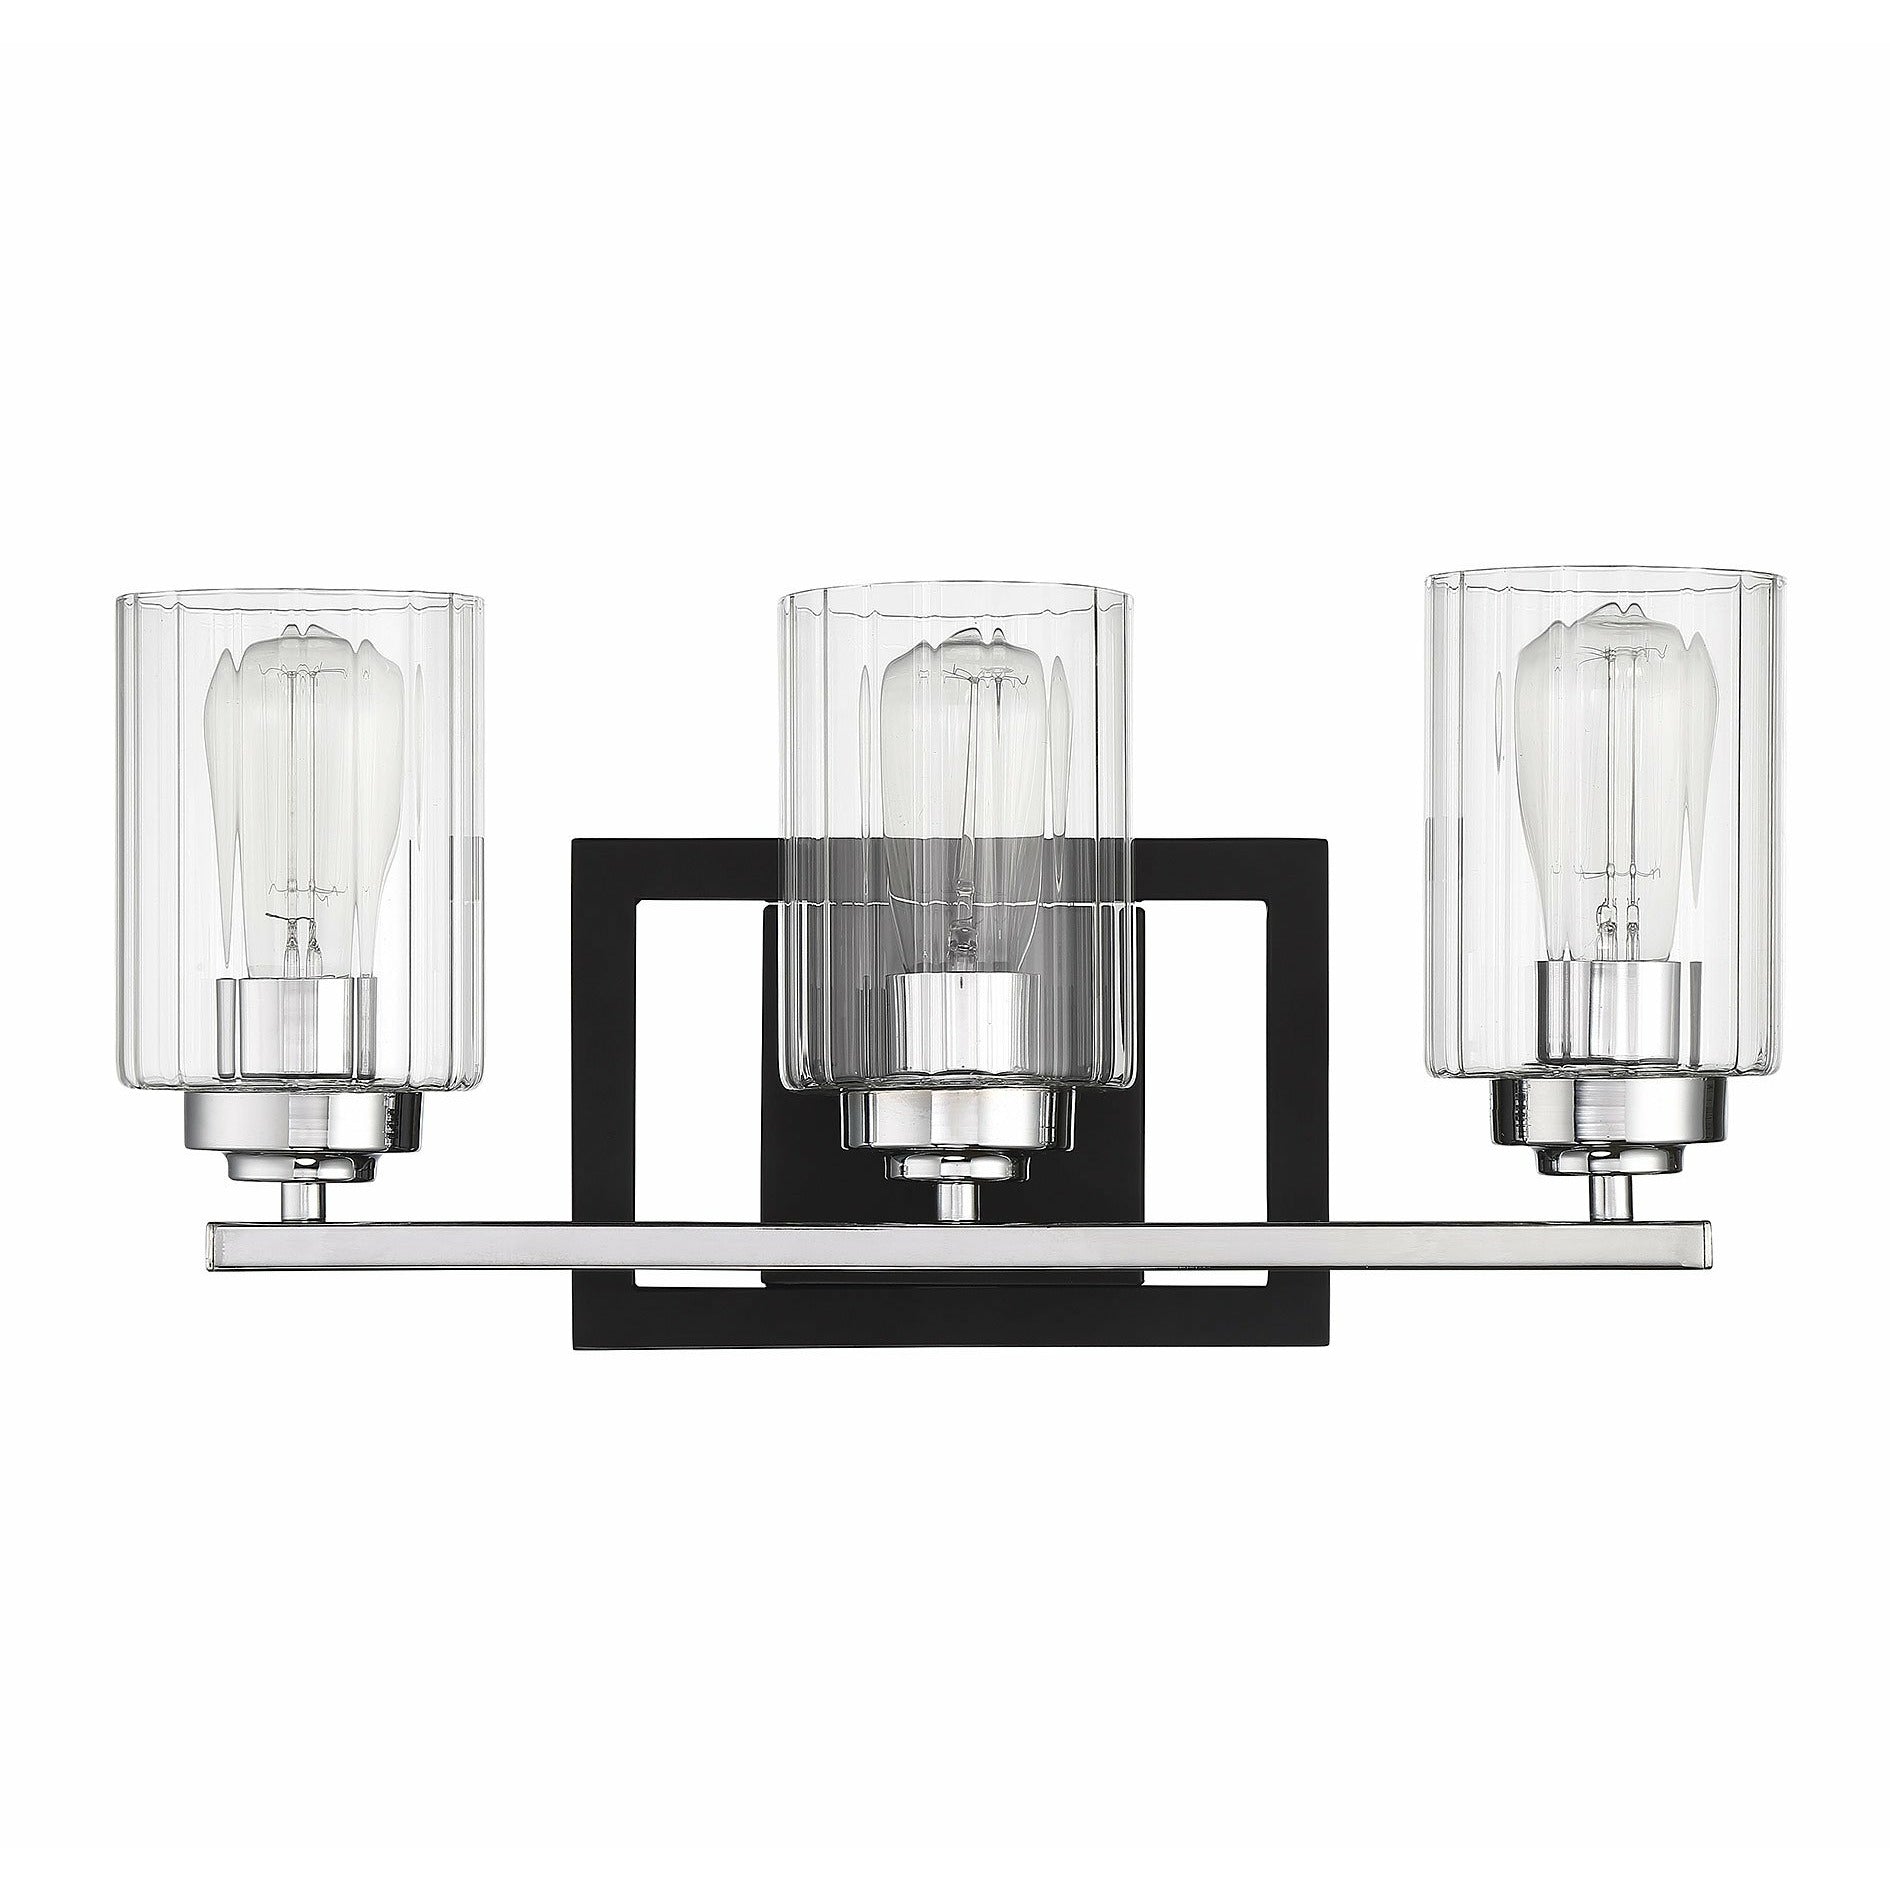 Redmond Vanity Light Matte Black with Polished Chrome Accents